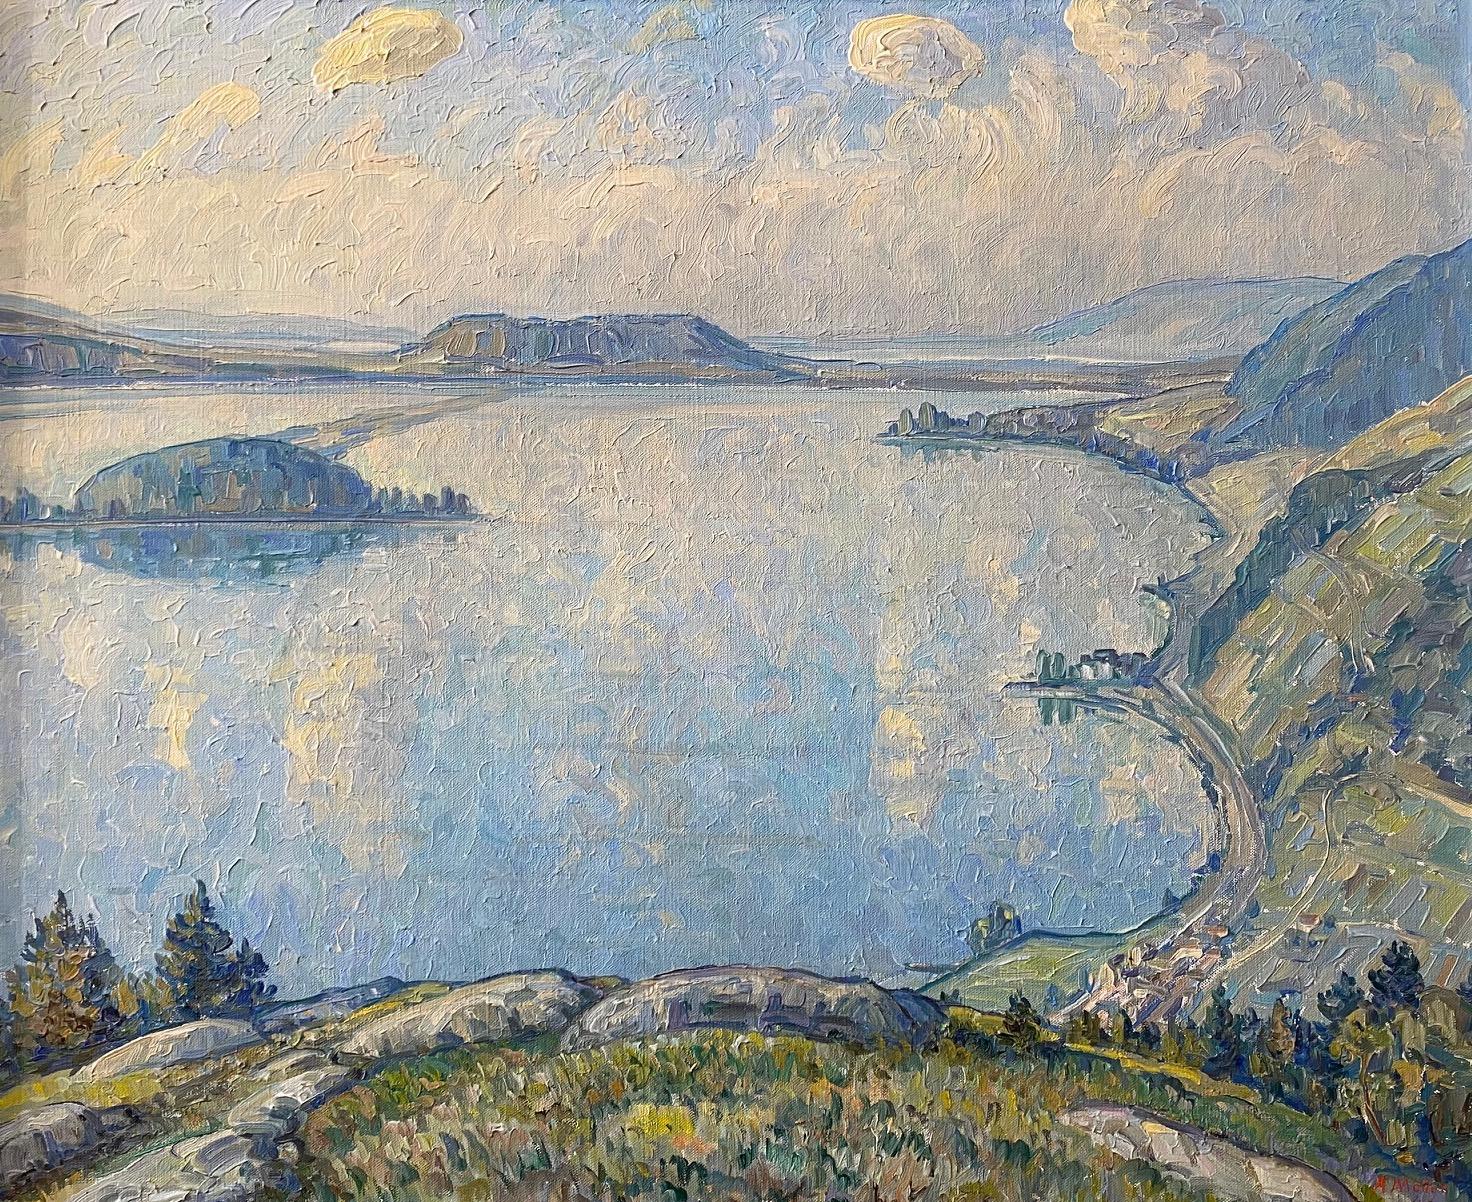 A. Müller Landscape Painting - Lake view by A. Muller - Oil on canvas 60x73 cm